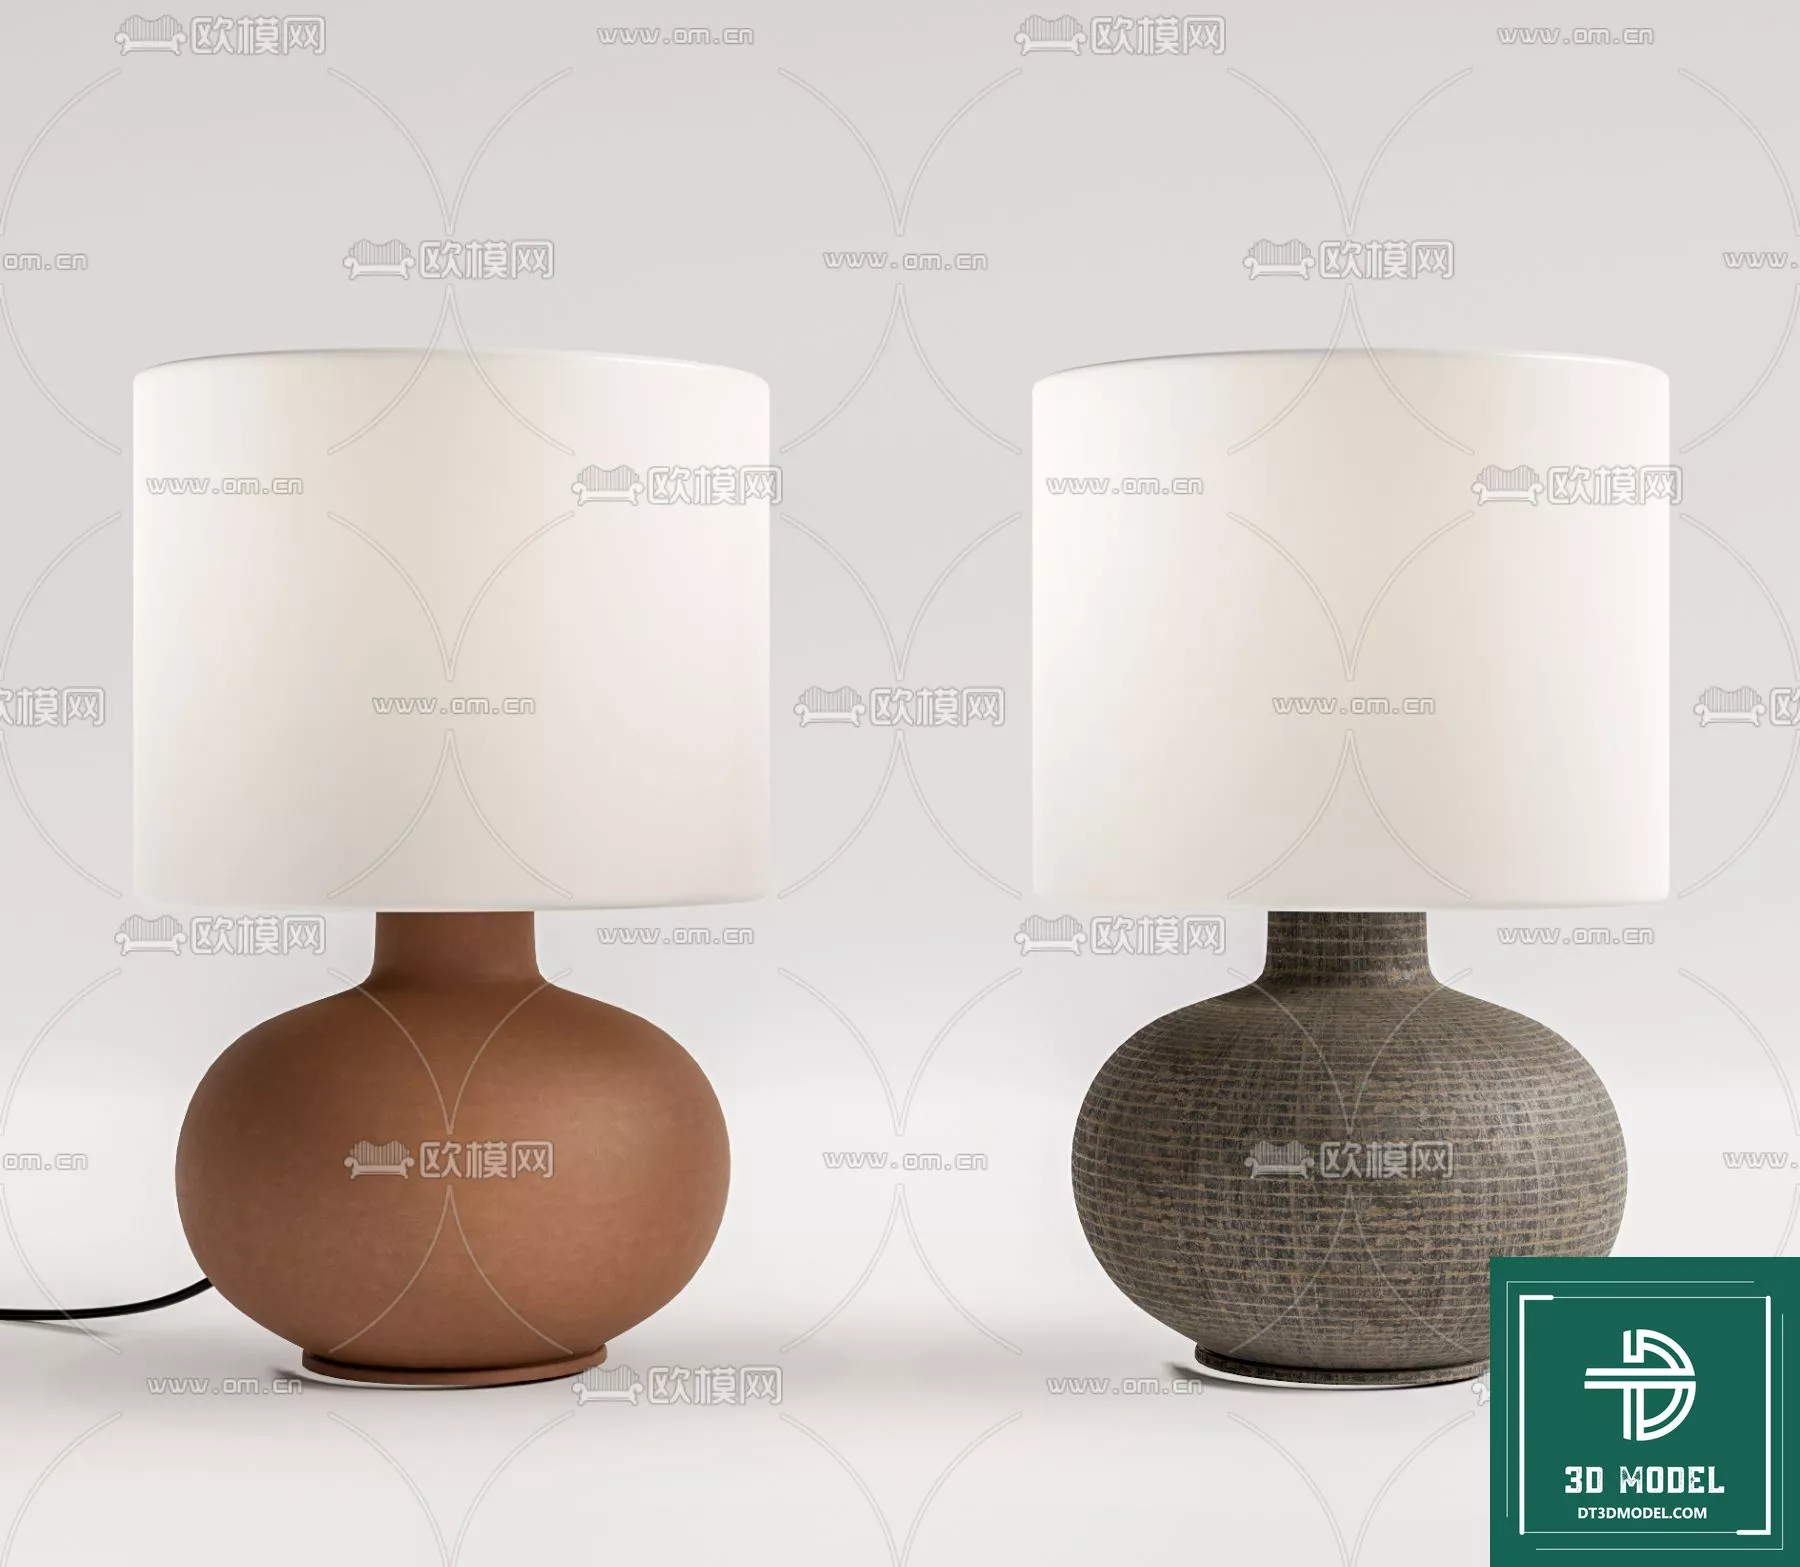 MODERN TABLE LAMP - SKETCHUP 3D MODEL - VRAY OR ENSCAPE - ID14483